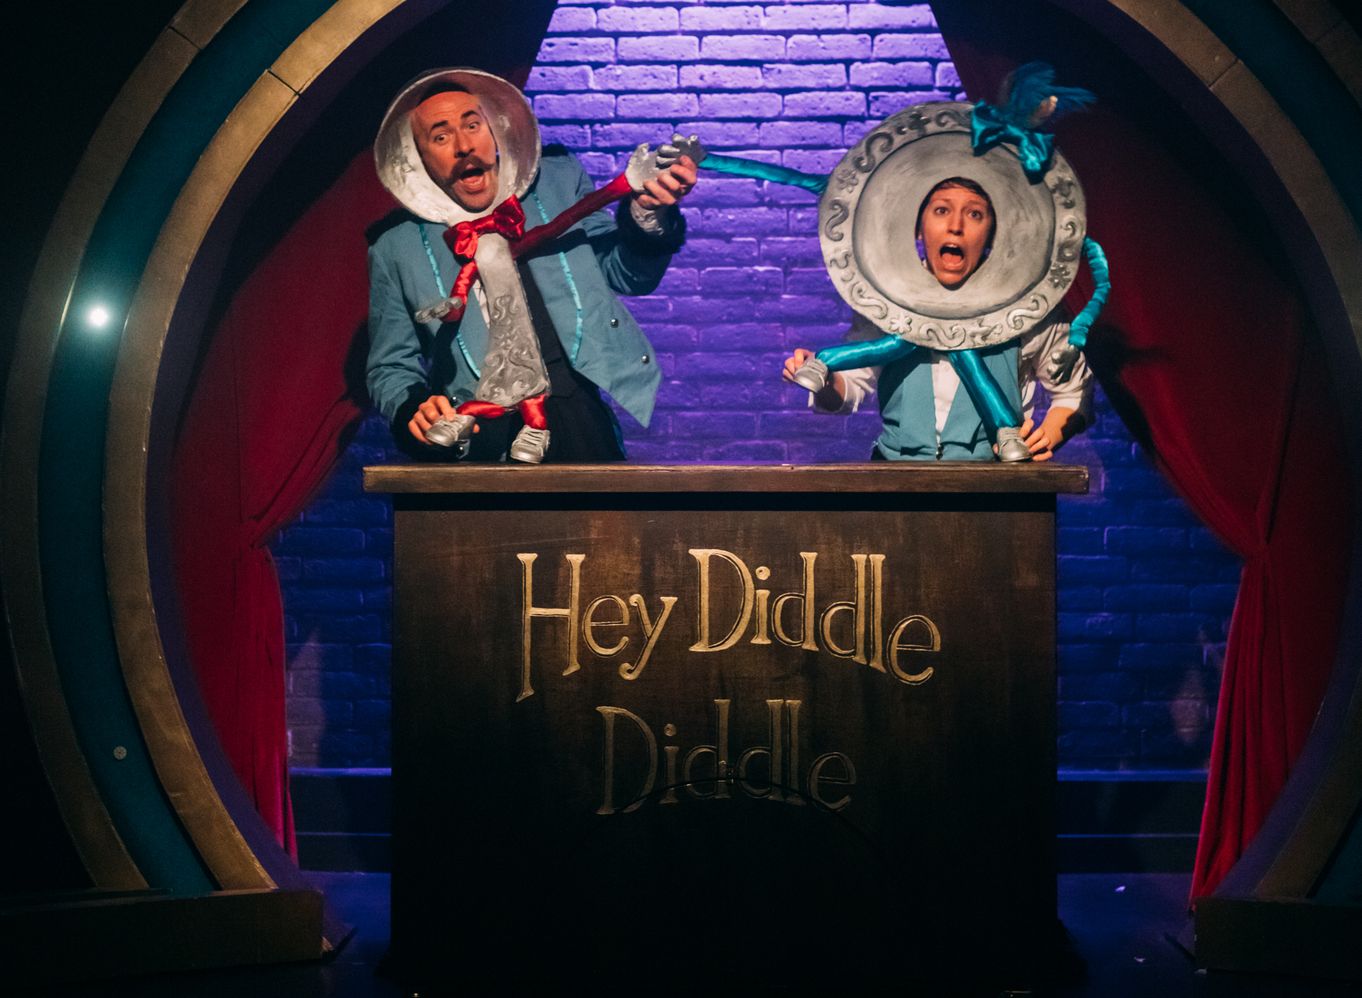 hannah goudie-hunter and jeremy bradshaw in hey diddle diddle. photo von fox promotions.jpg